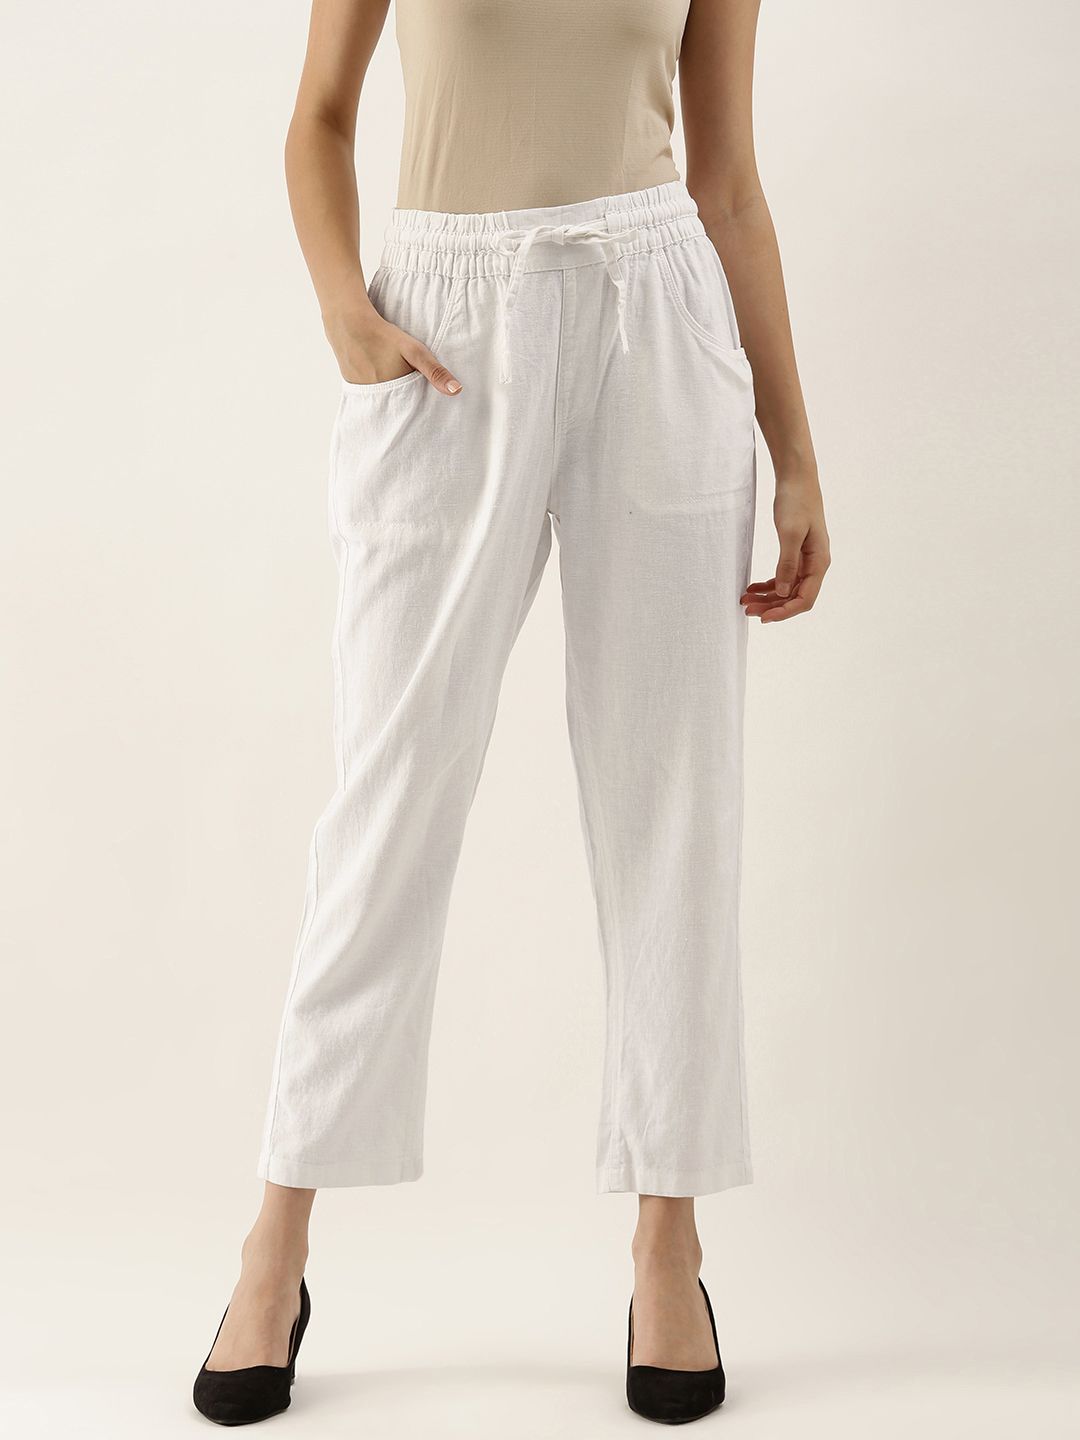 AND Women White Solid Straight Fit Trousers Price in India